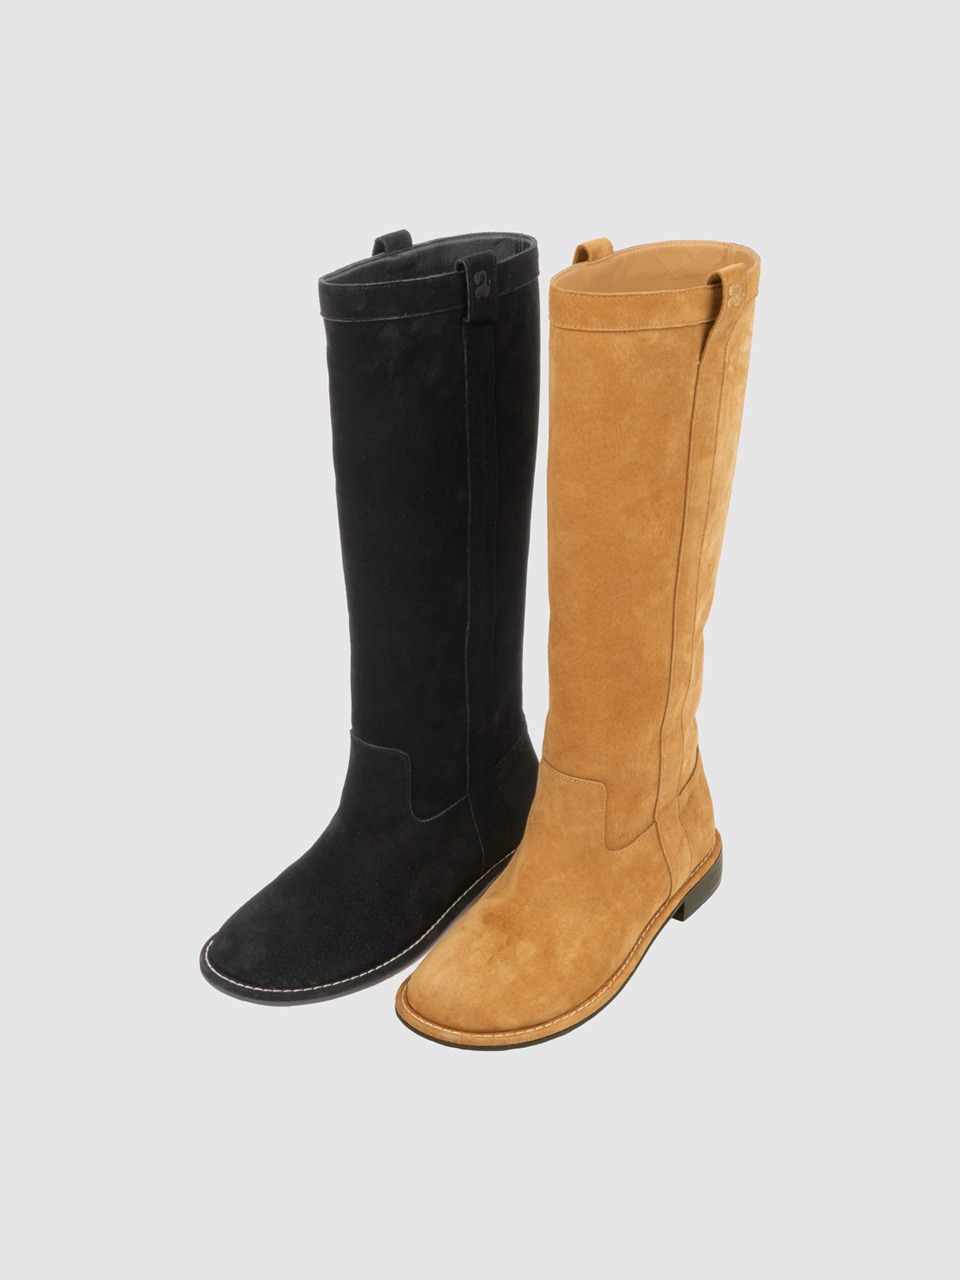 Suede long boots